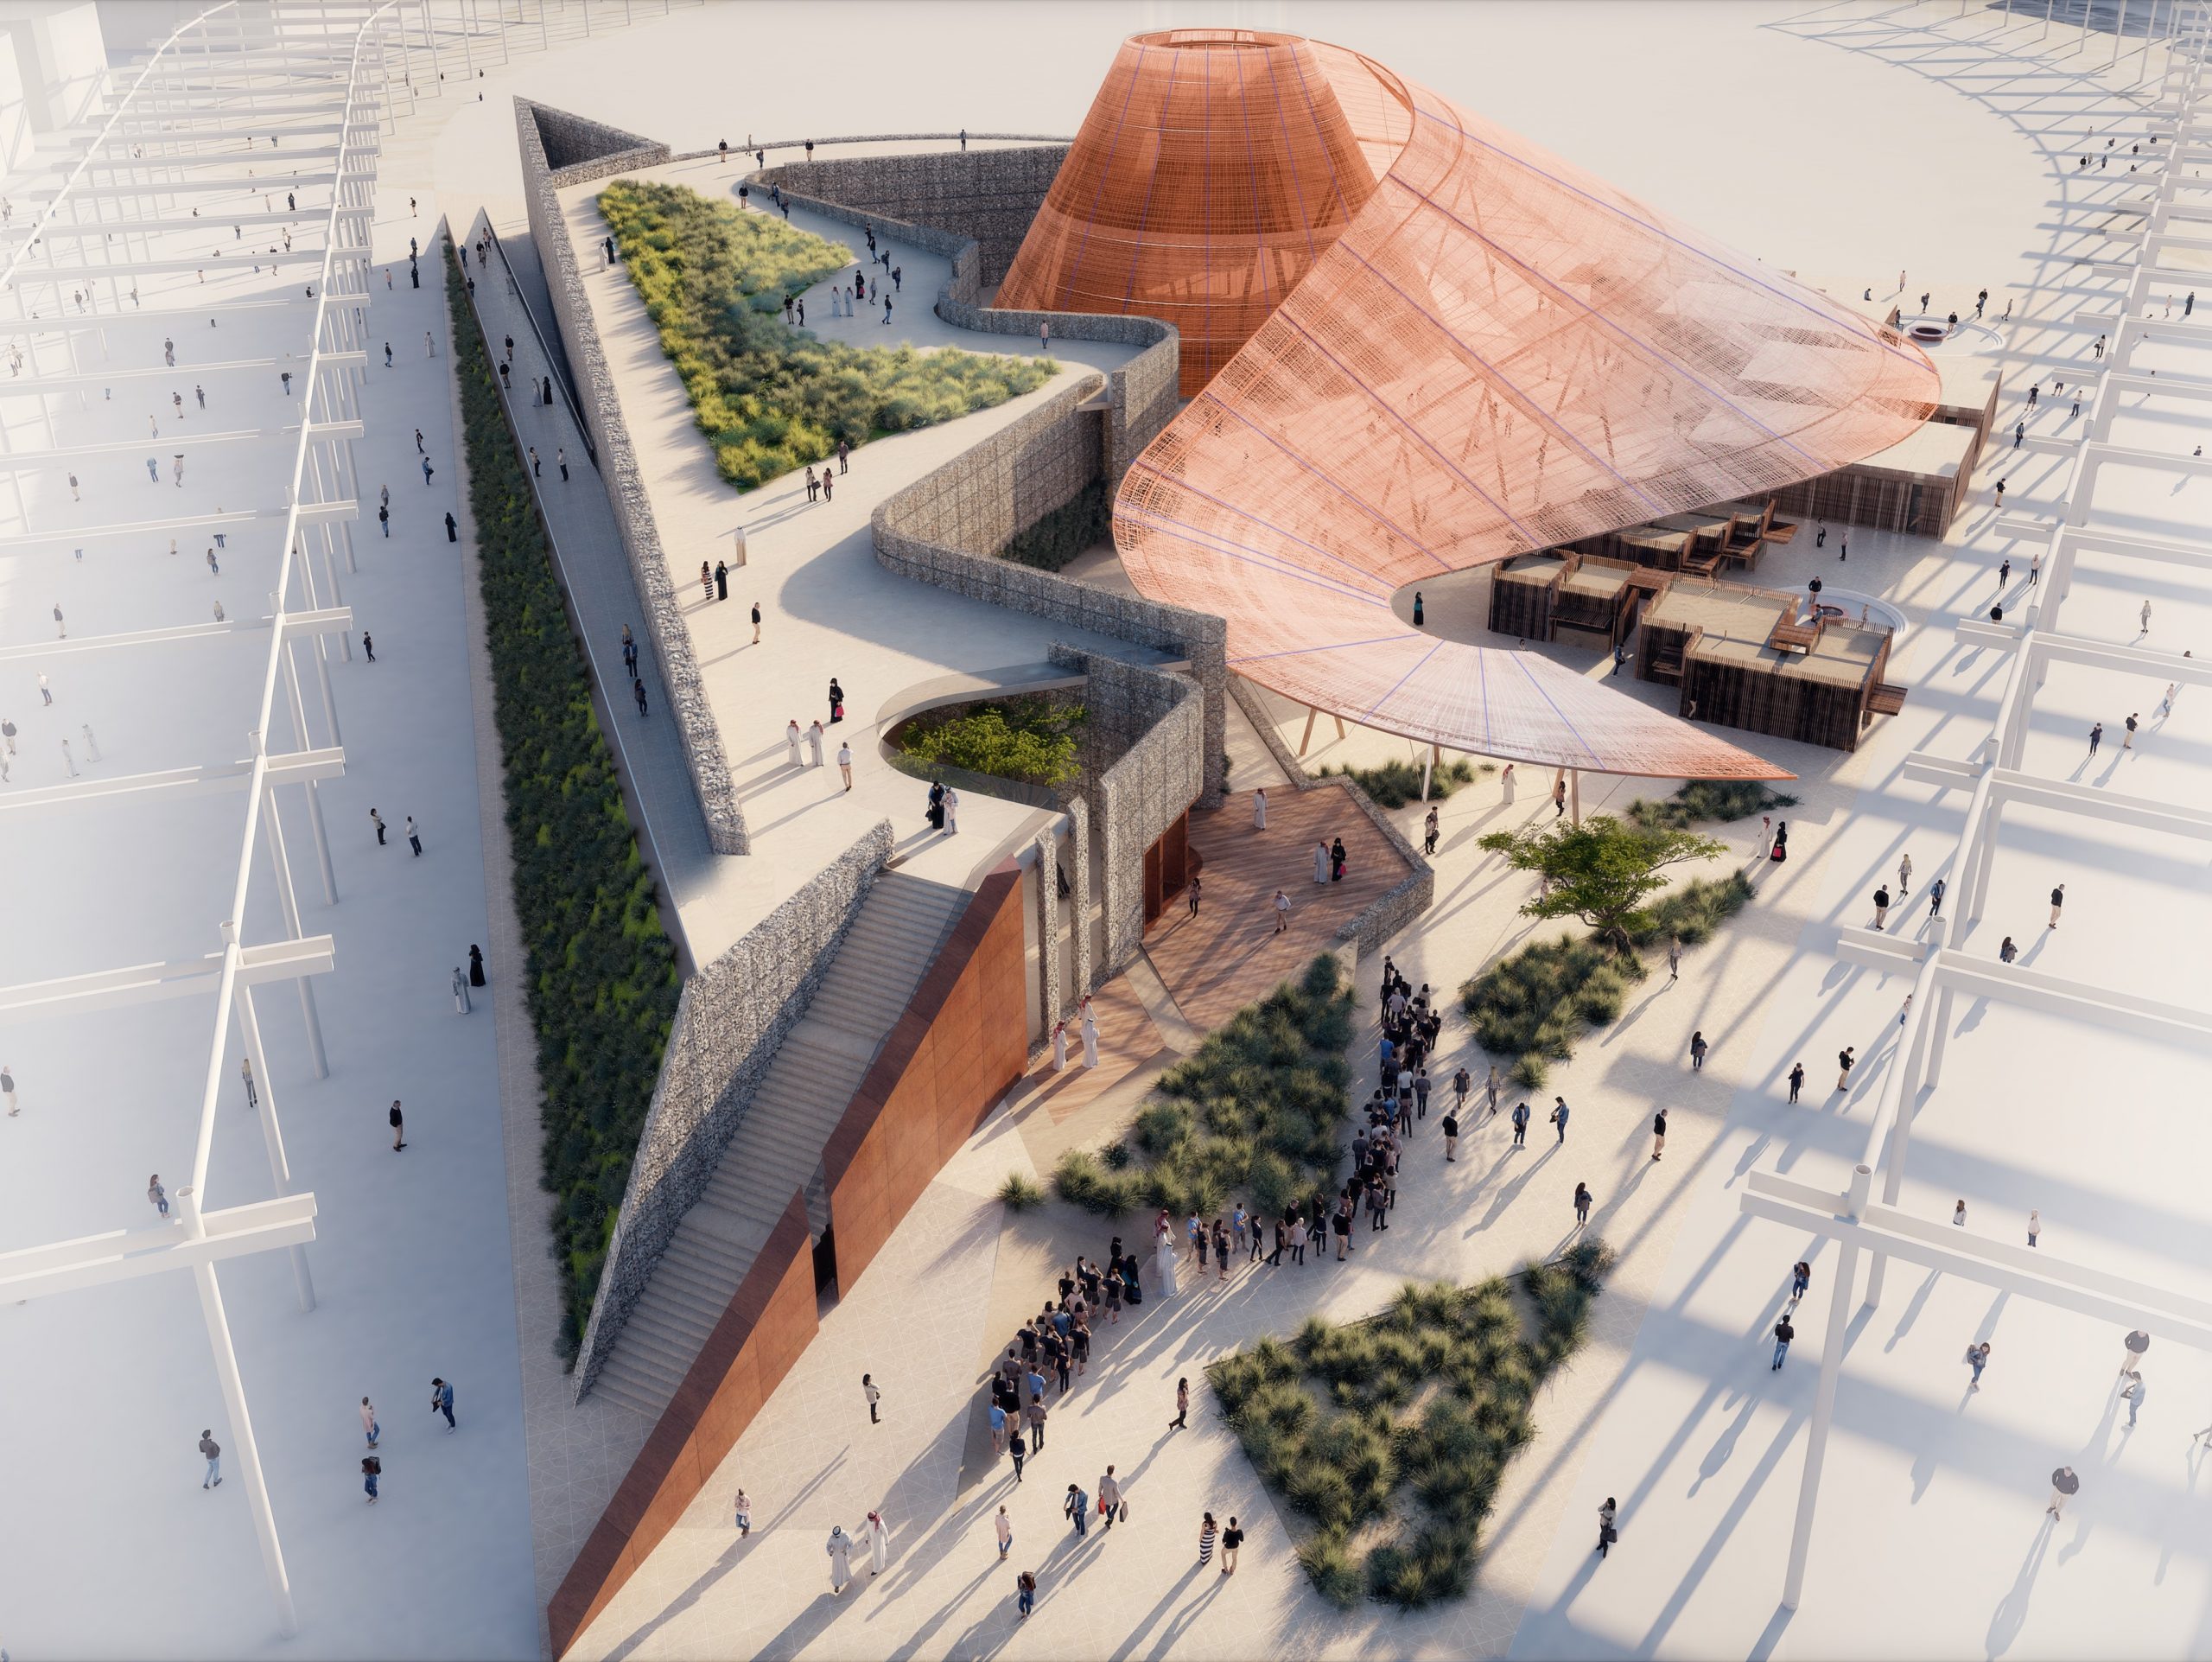 Expo 2020 reveals 'Opportunity Pavilion', made completely of recyclable